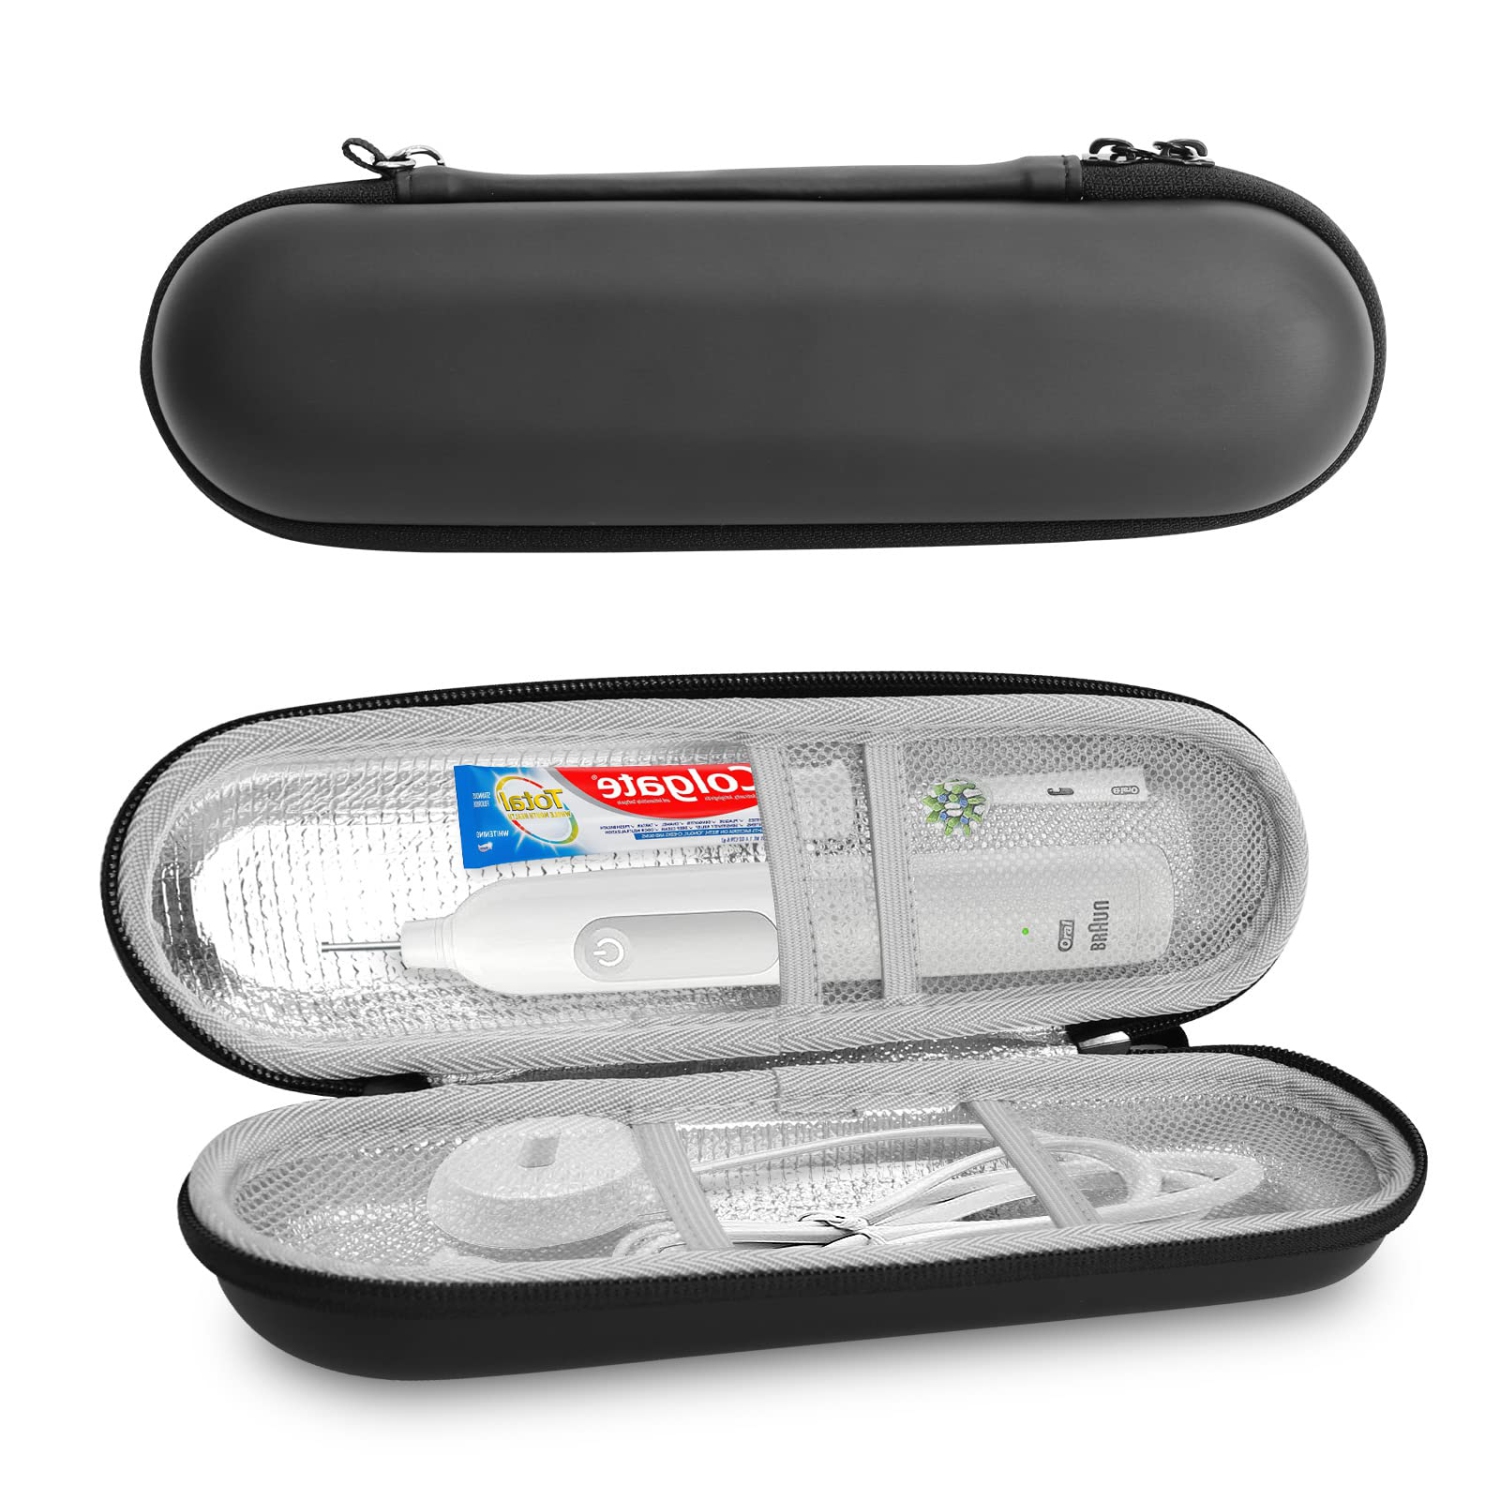 Electric Toothbrush Travel Case for Oral-B/Pro 1000 1500 5000 7000 6000 9600, Philips Sonicare 4100 6100 5100 6500 7500, Hard EVA Case Protective Cover Storage Bag